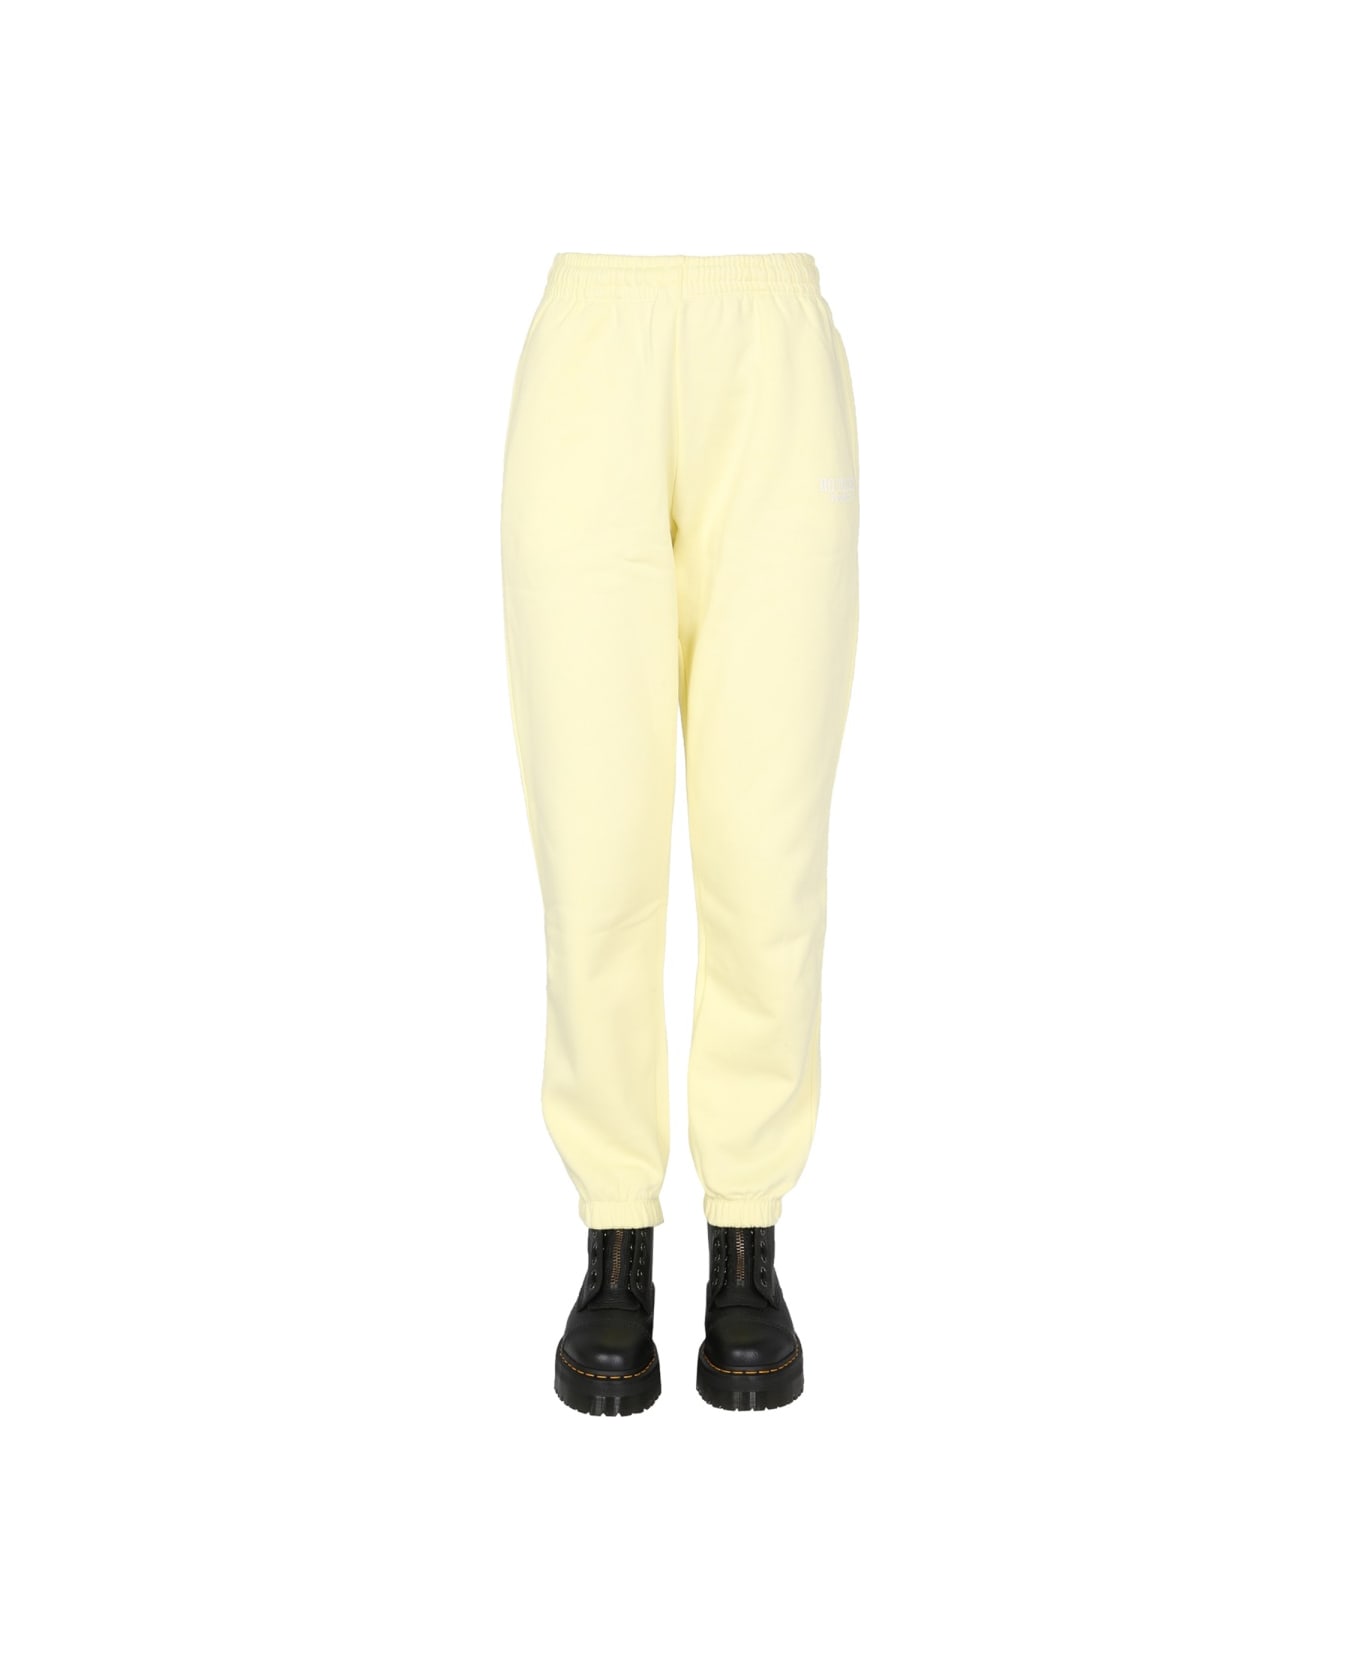 Rotate by Birger Christensen "mimi" Jogging Trousers - YELLOW